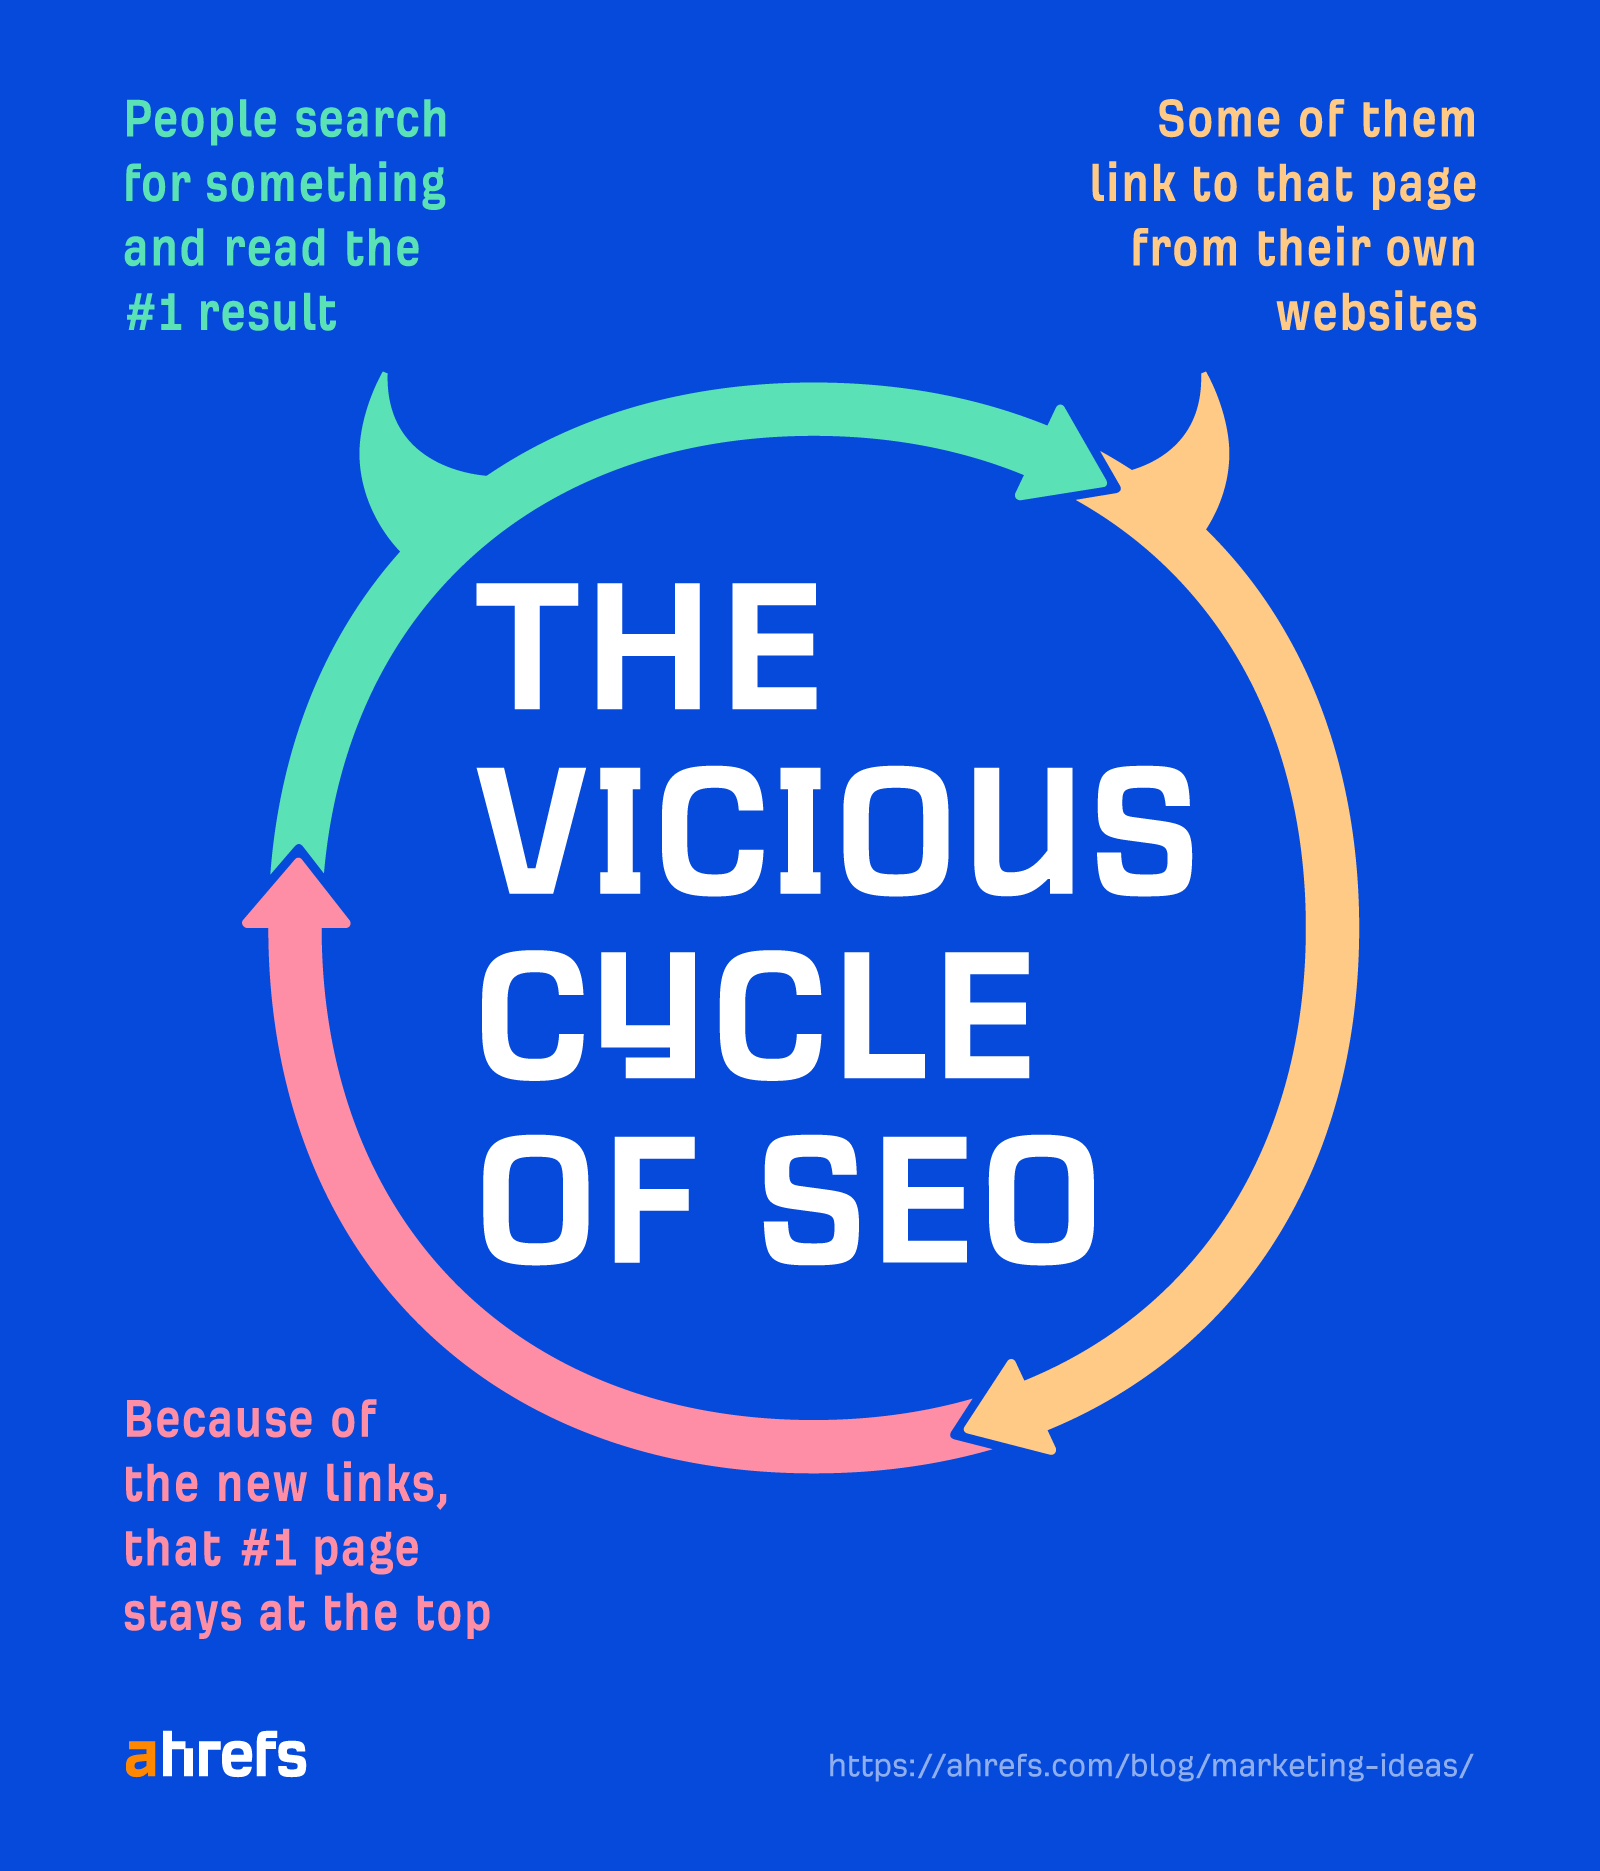 The vicious cycle of SEO